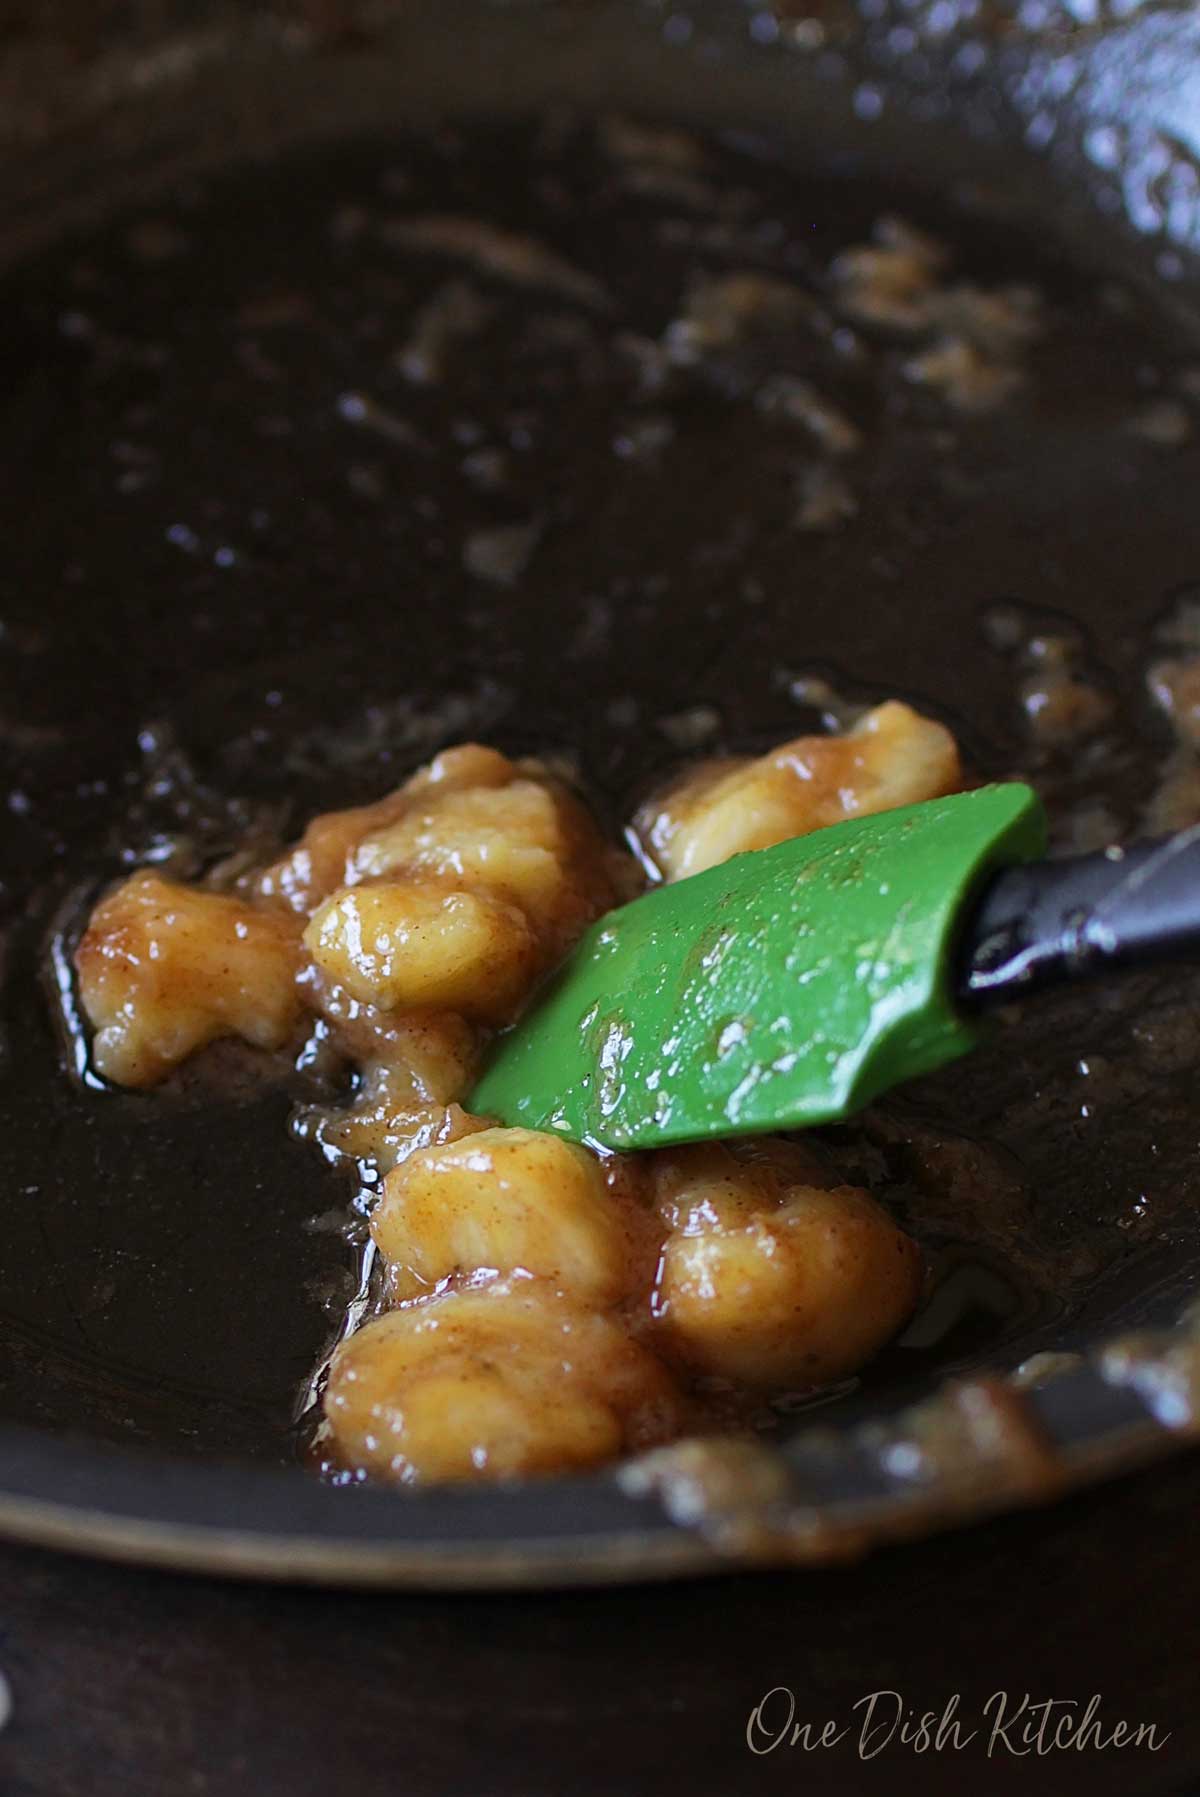 Banana slices cooking in a pan with melted butter and brown sugar.